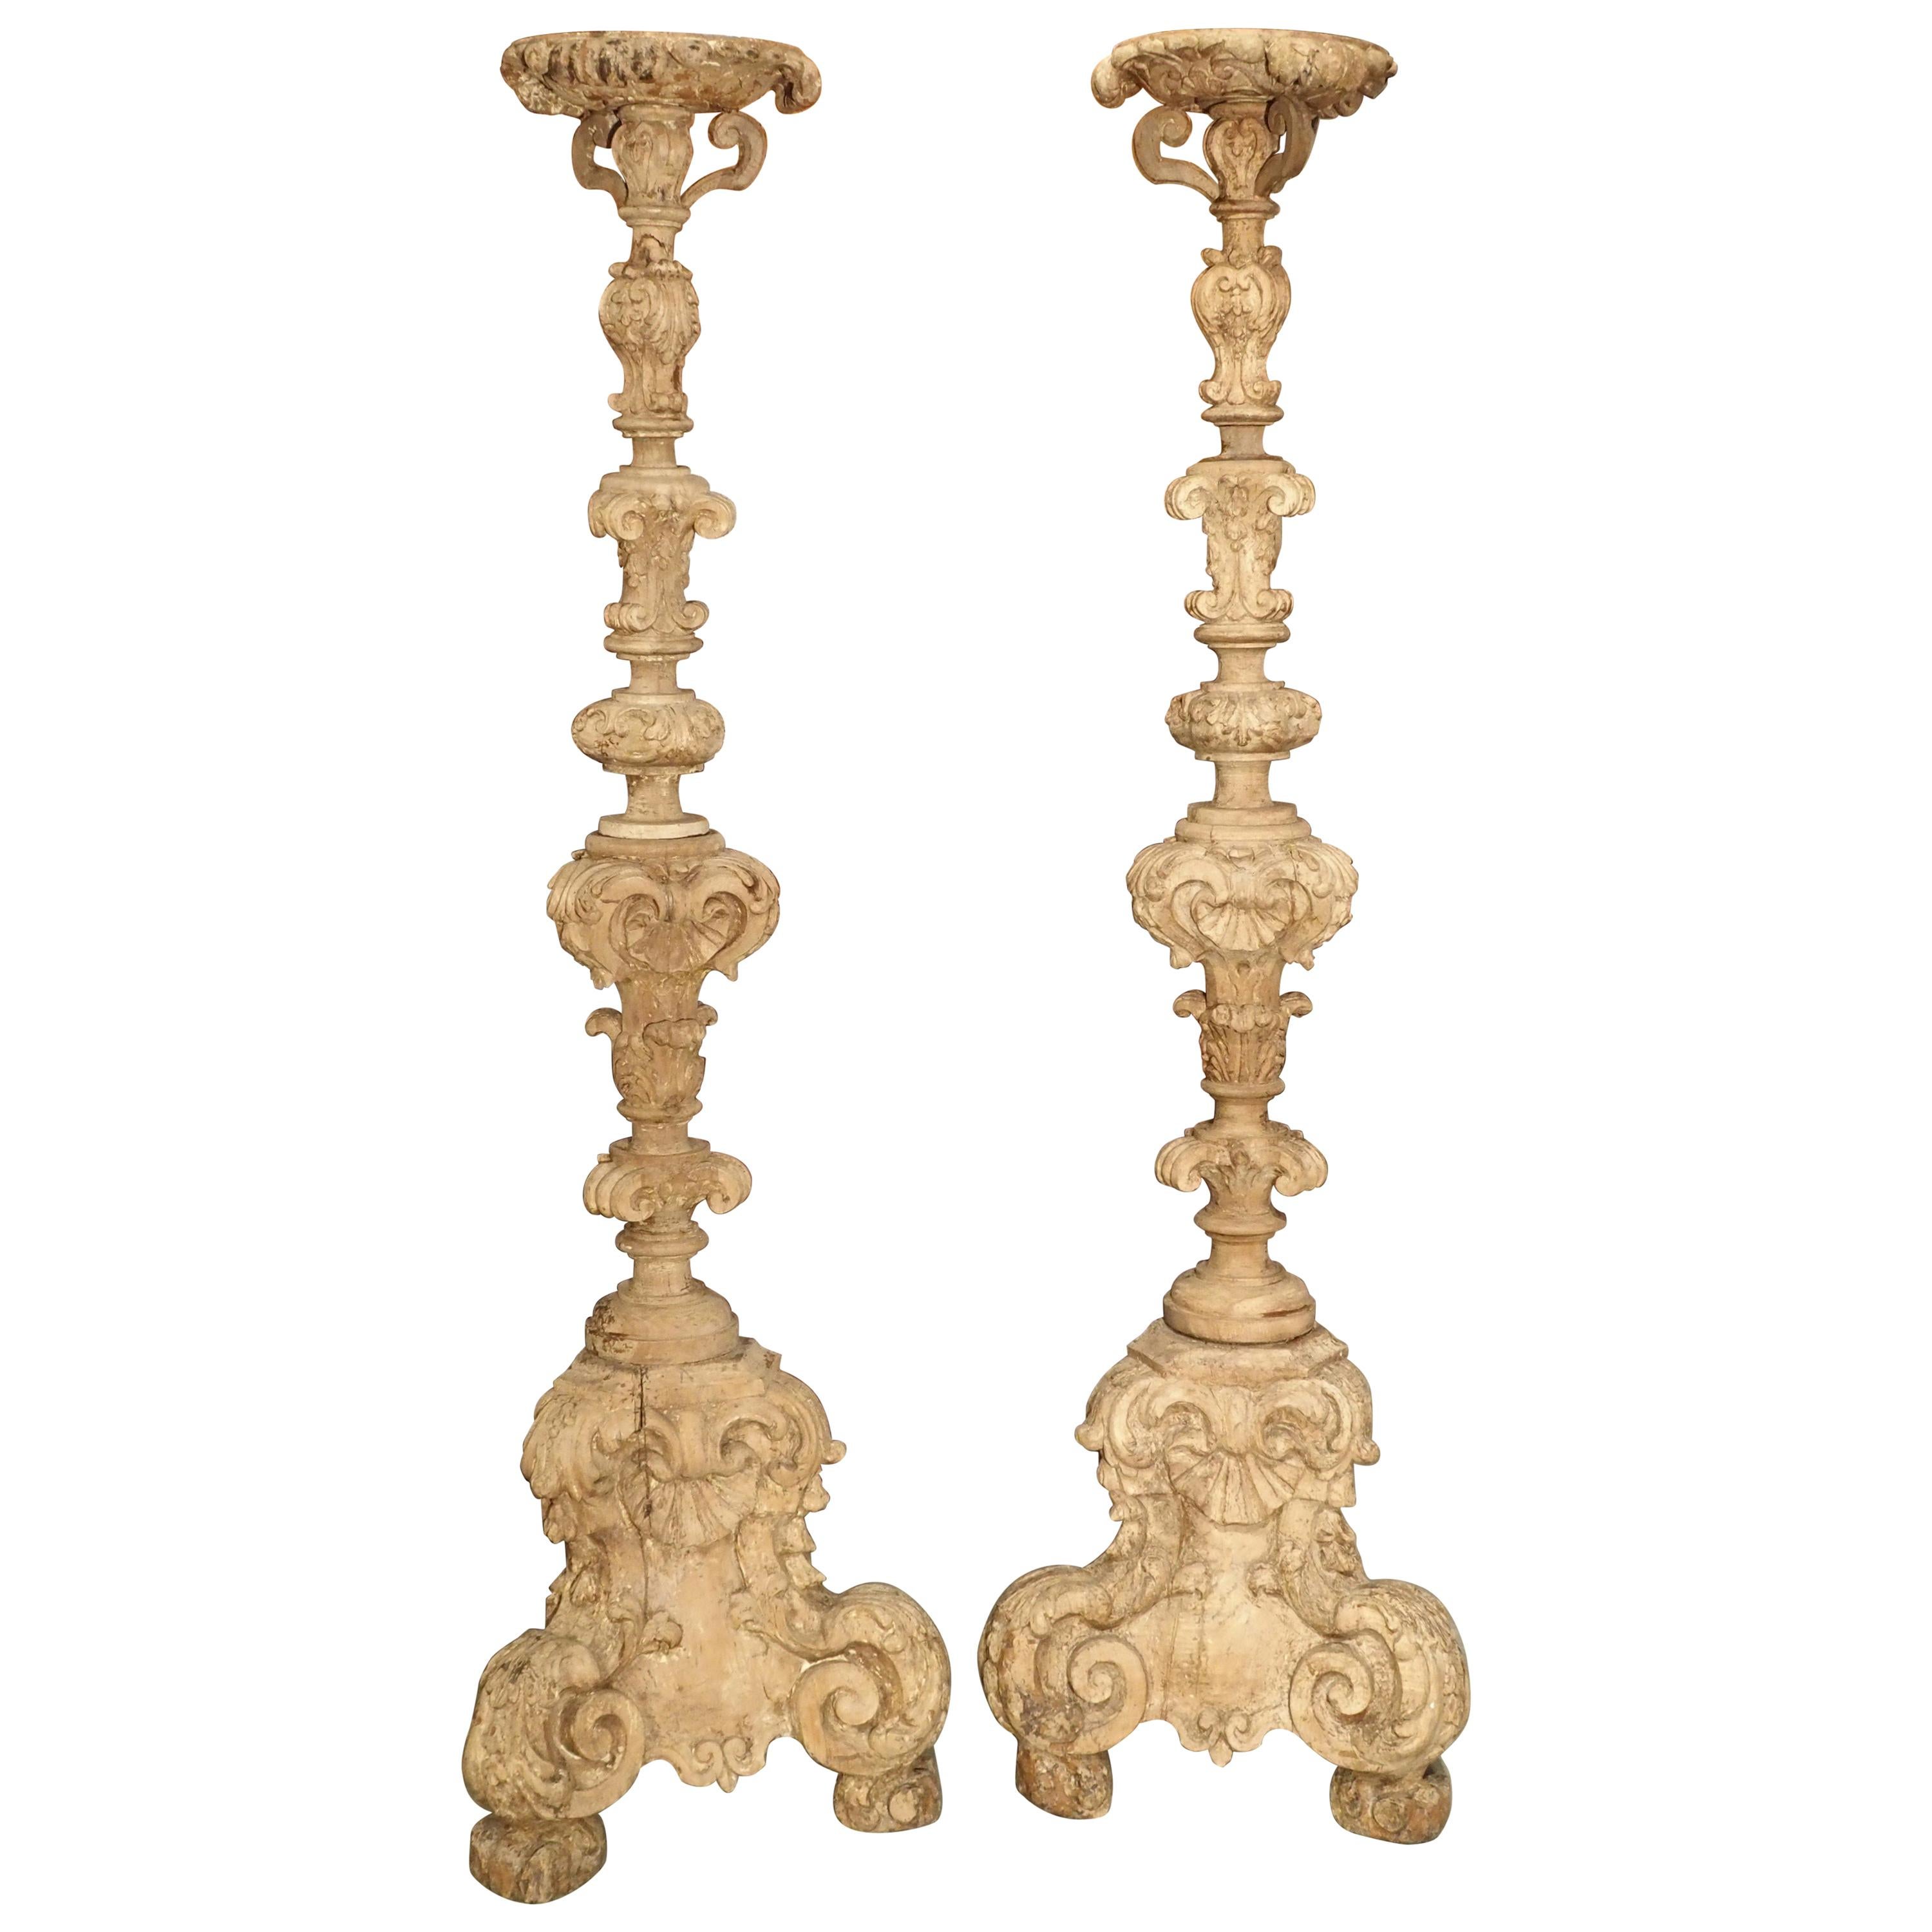 Pair of 17th Century Light Walnut Wood Candlesticks from France